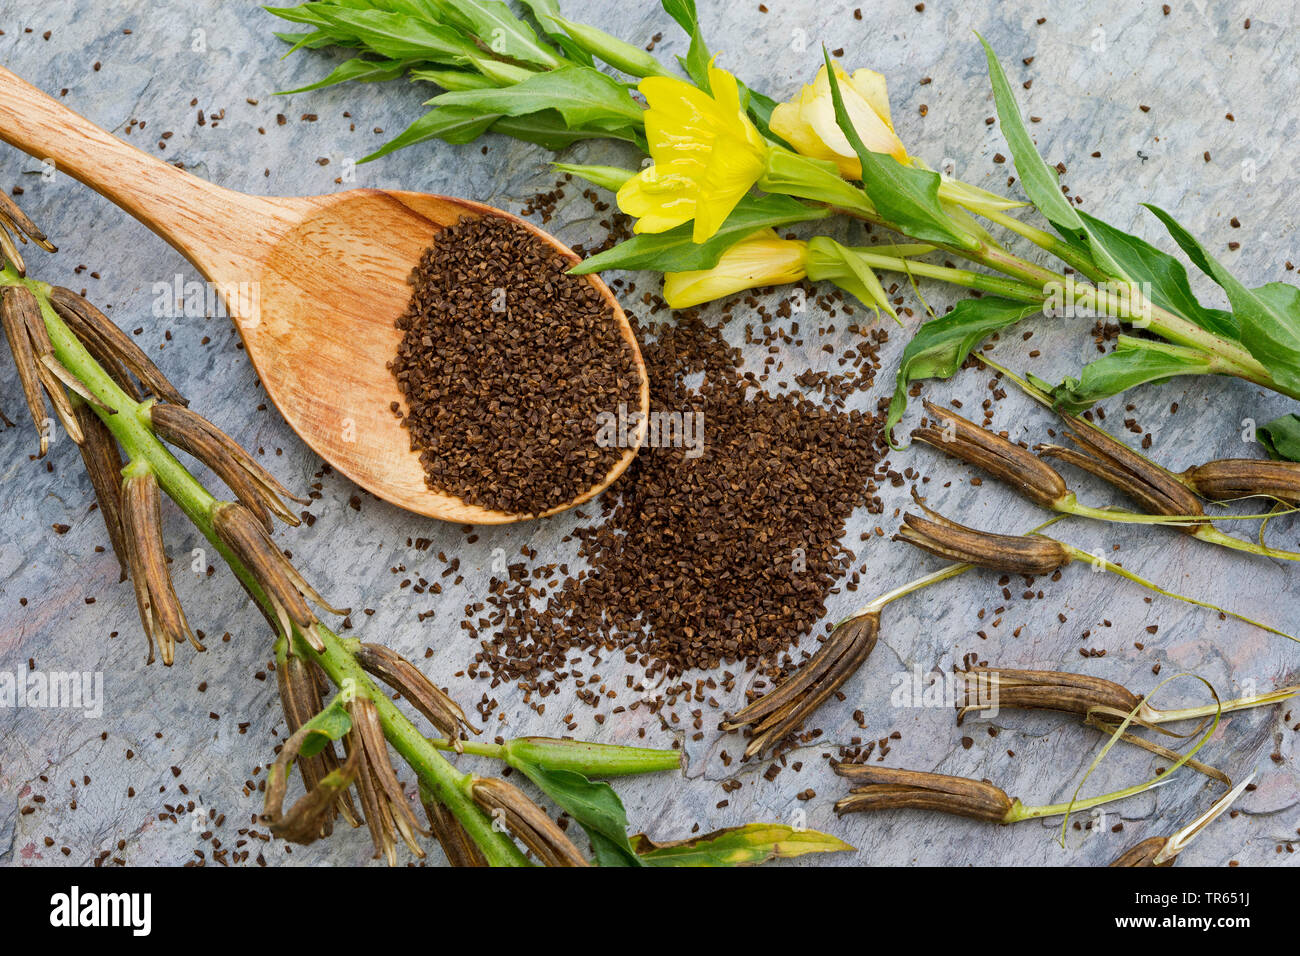 common evening primrose (Oenothera biennis), seed in a bowl, production of a evening primrose oil, Germany Stock Photo